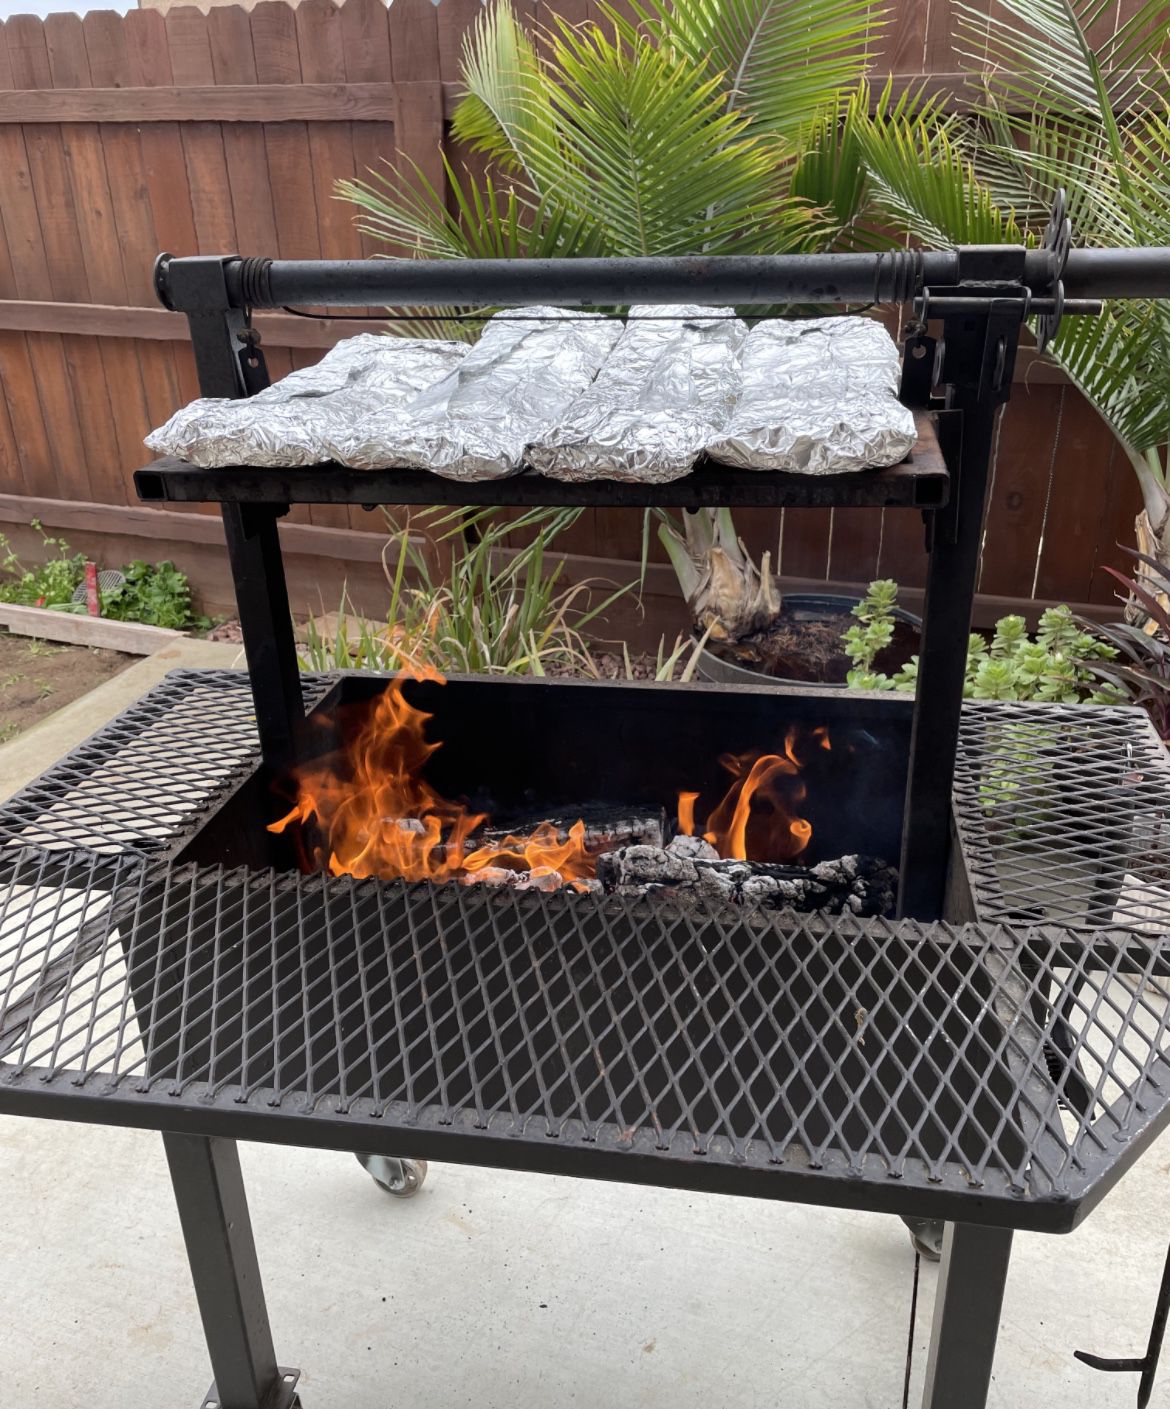 Johnsonville Sausage Grill for Sale in Irvine, CA - OfferUp